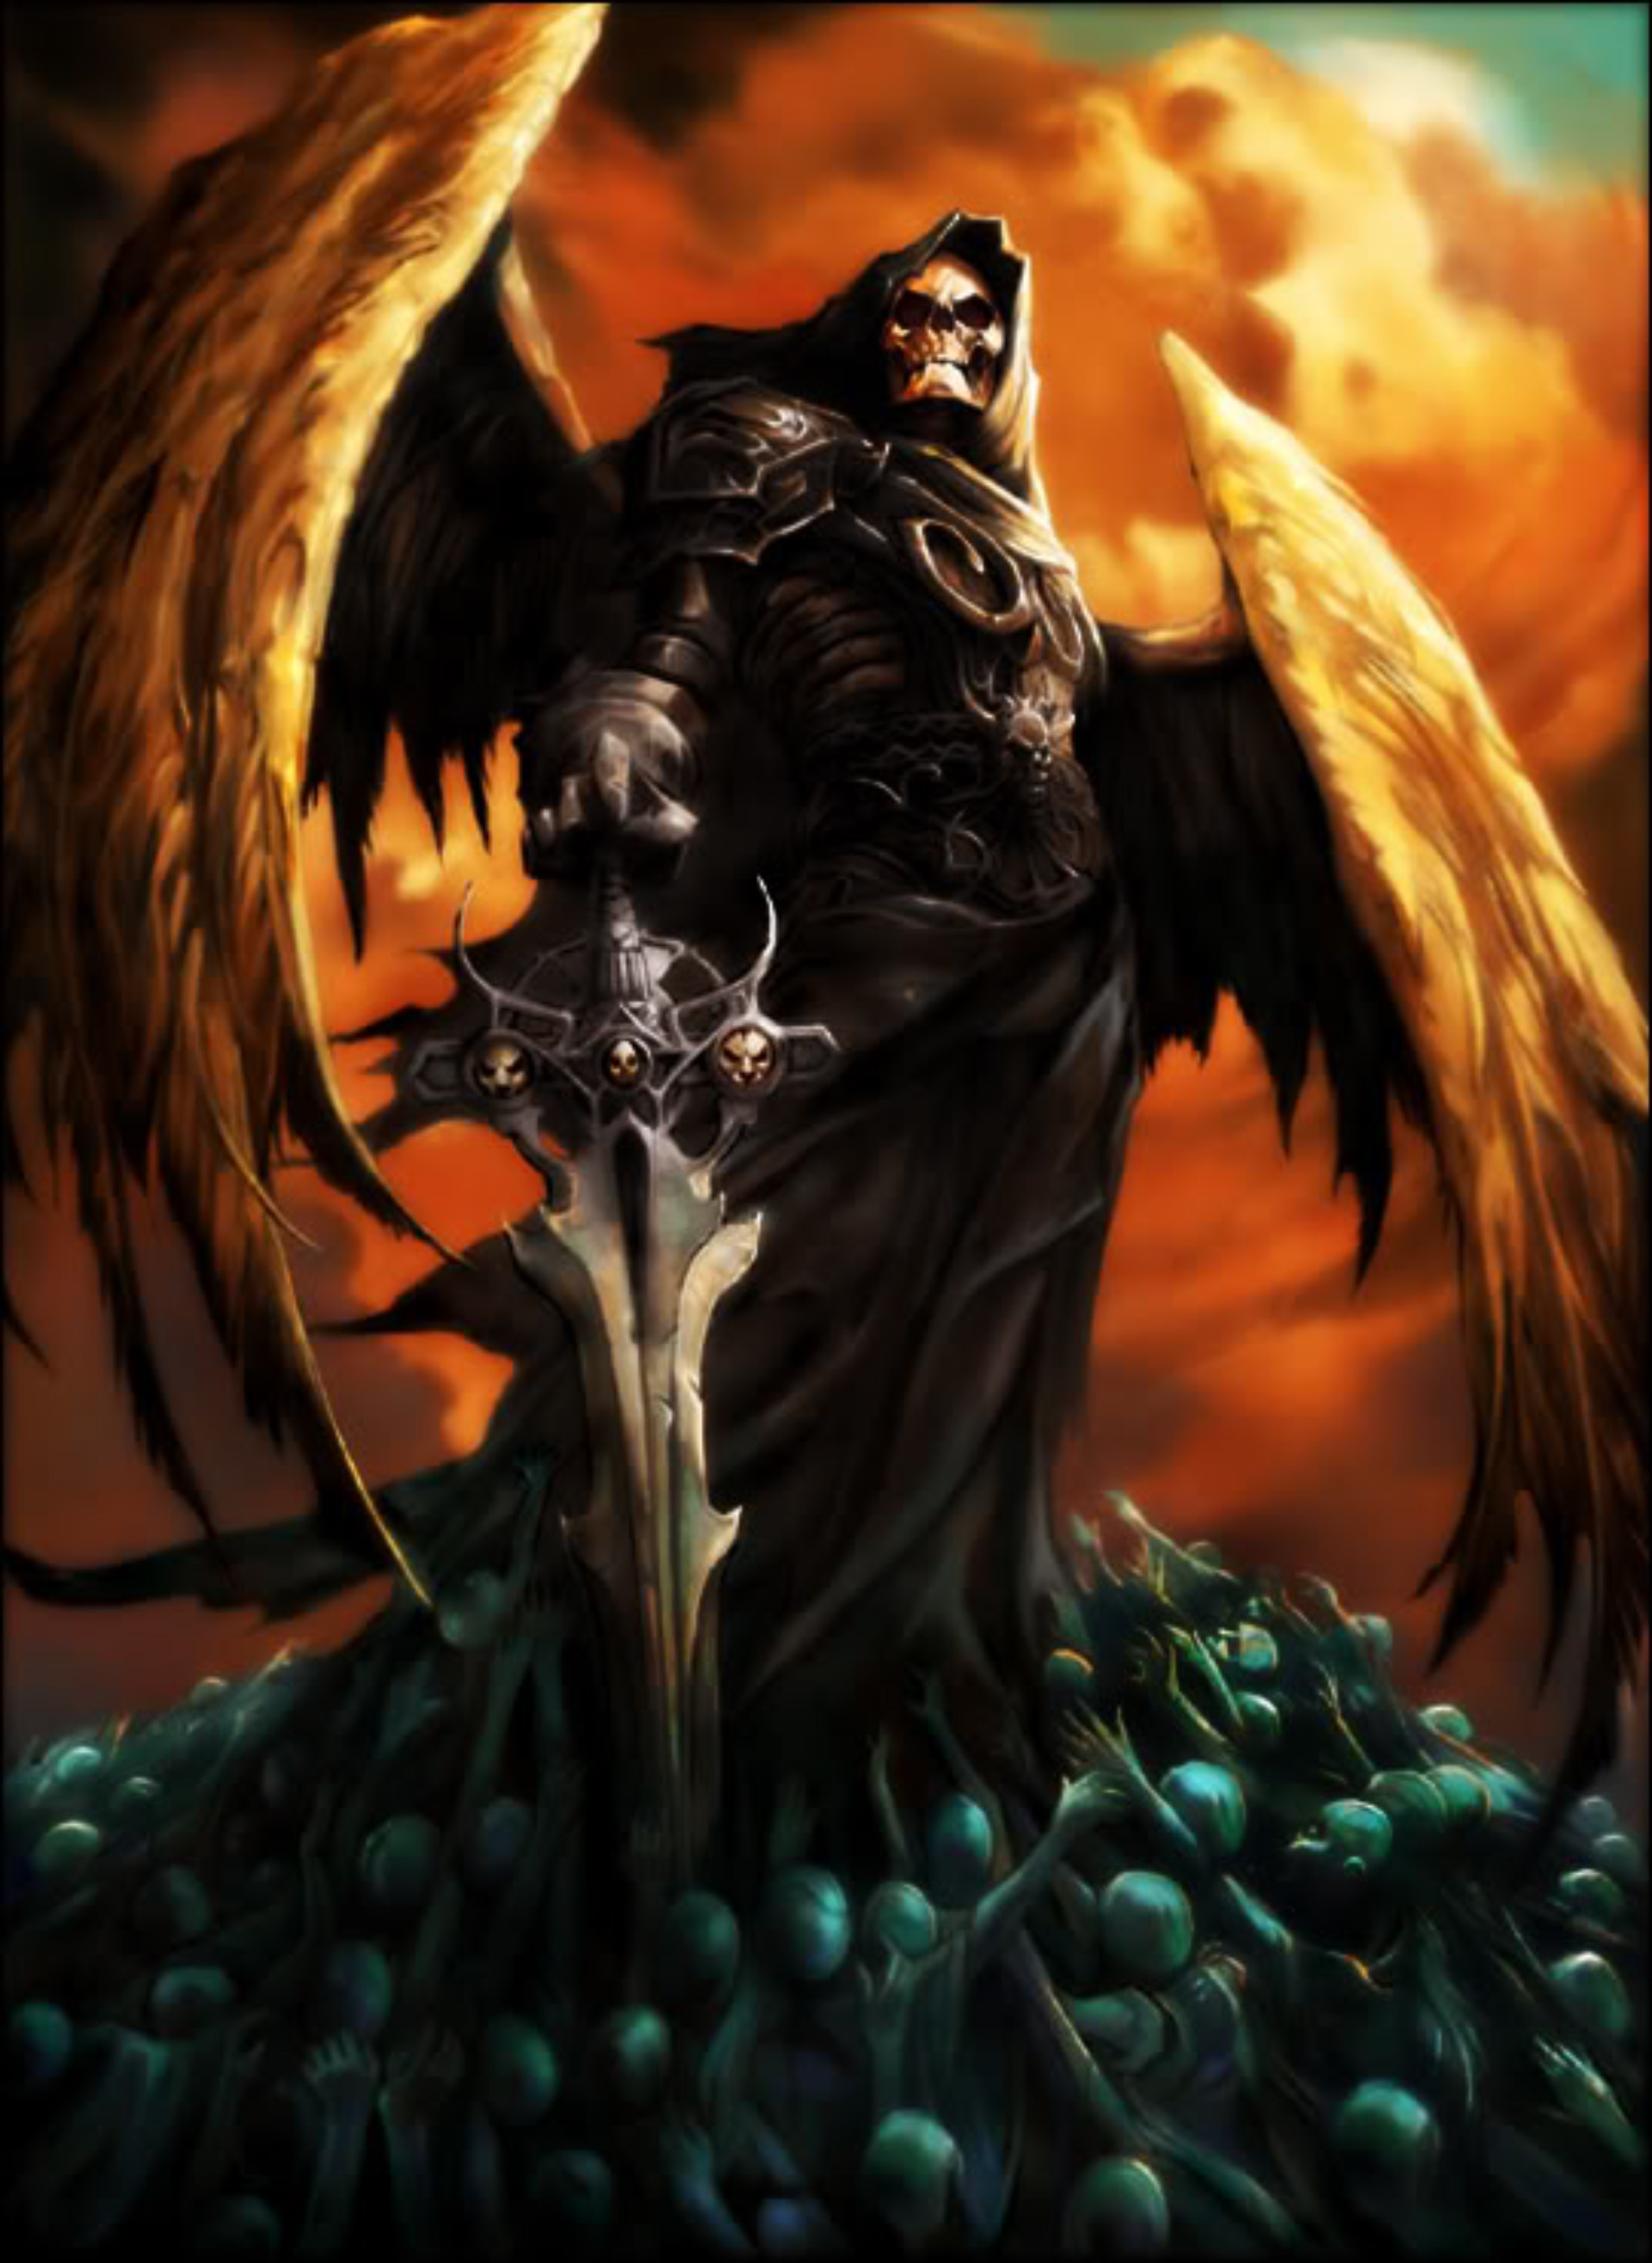 Image - Angel of death wallpaper by aaillustrations - Blood